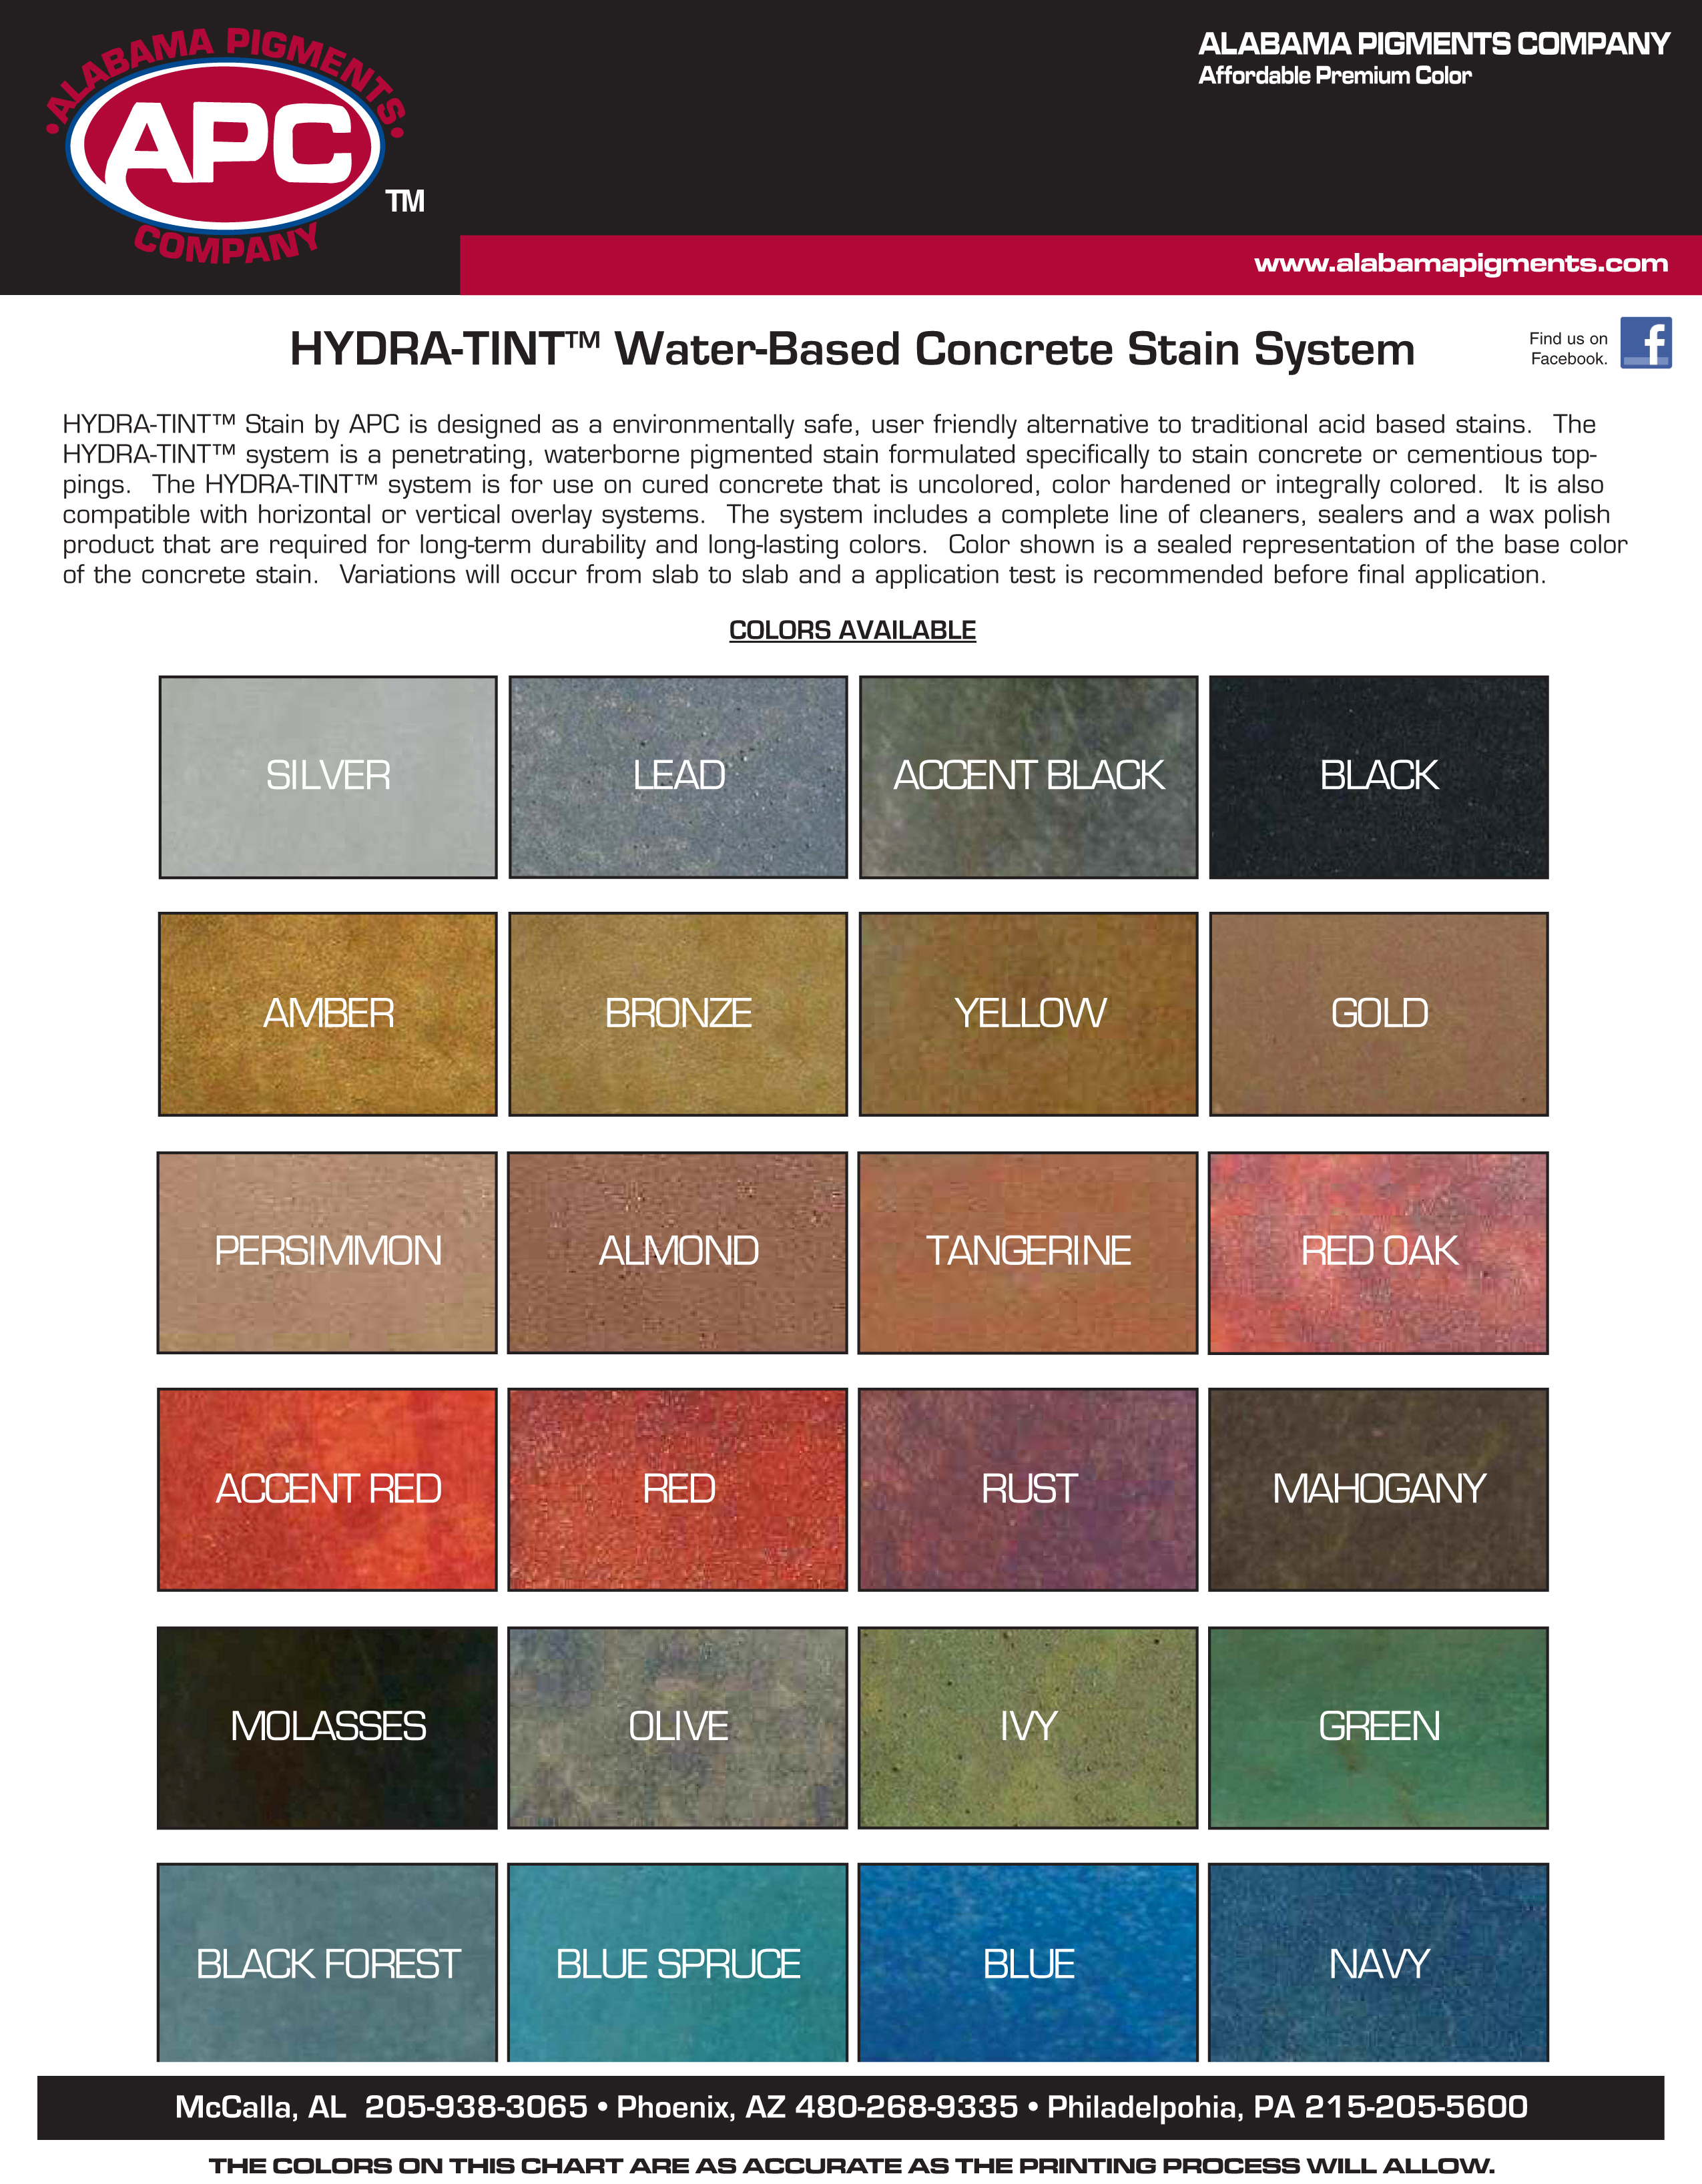 HYDRA-TINT Water Based Concrete Stain System APC